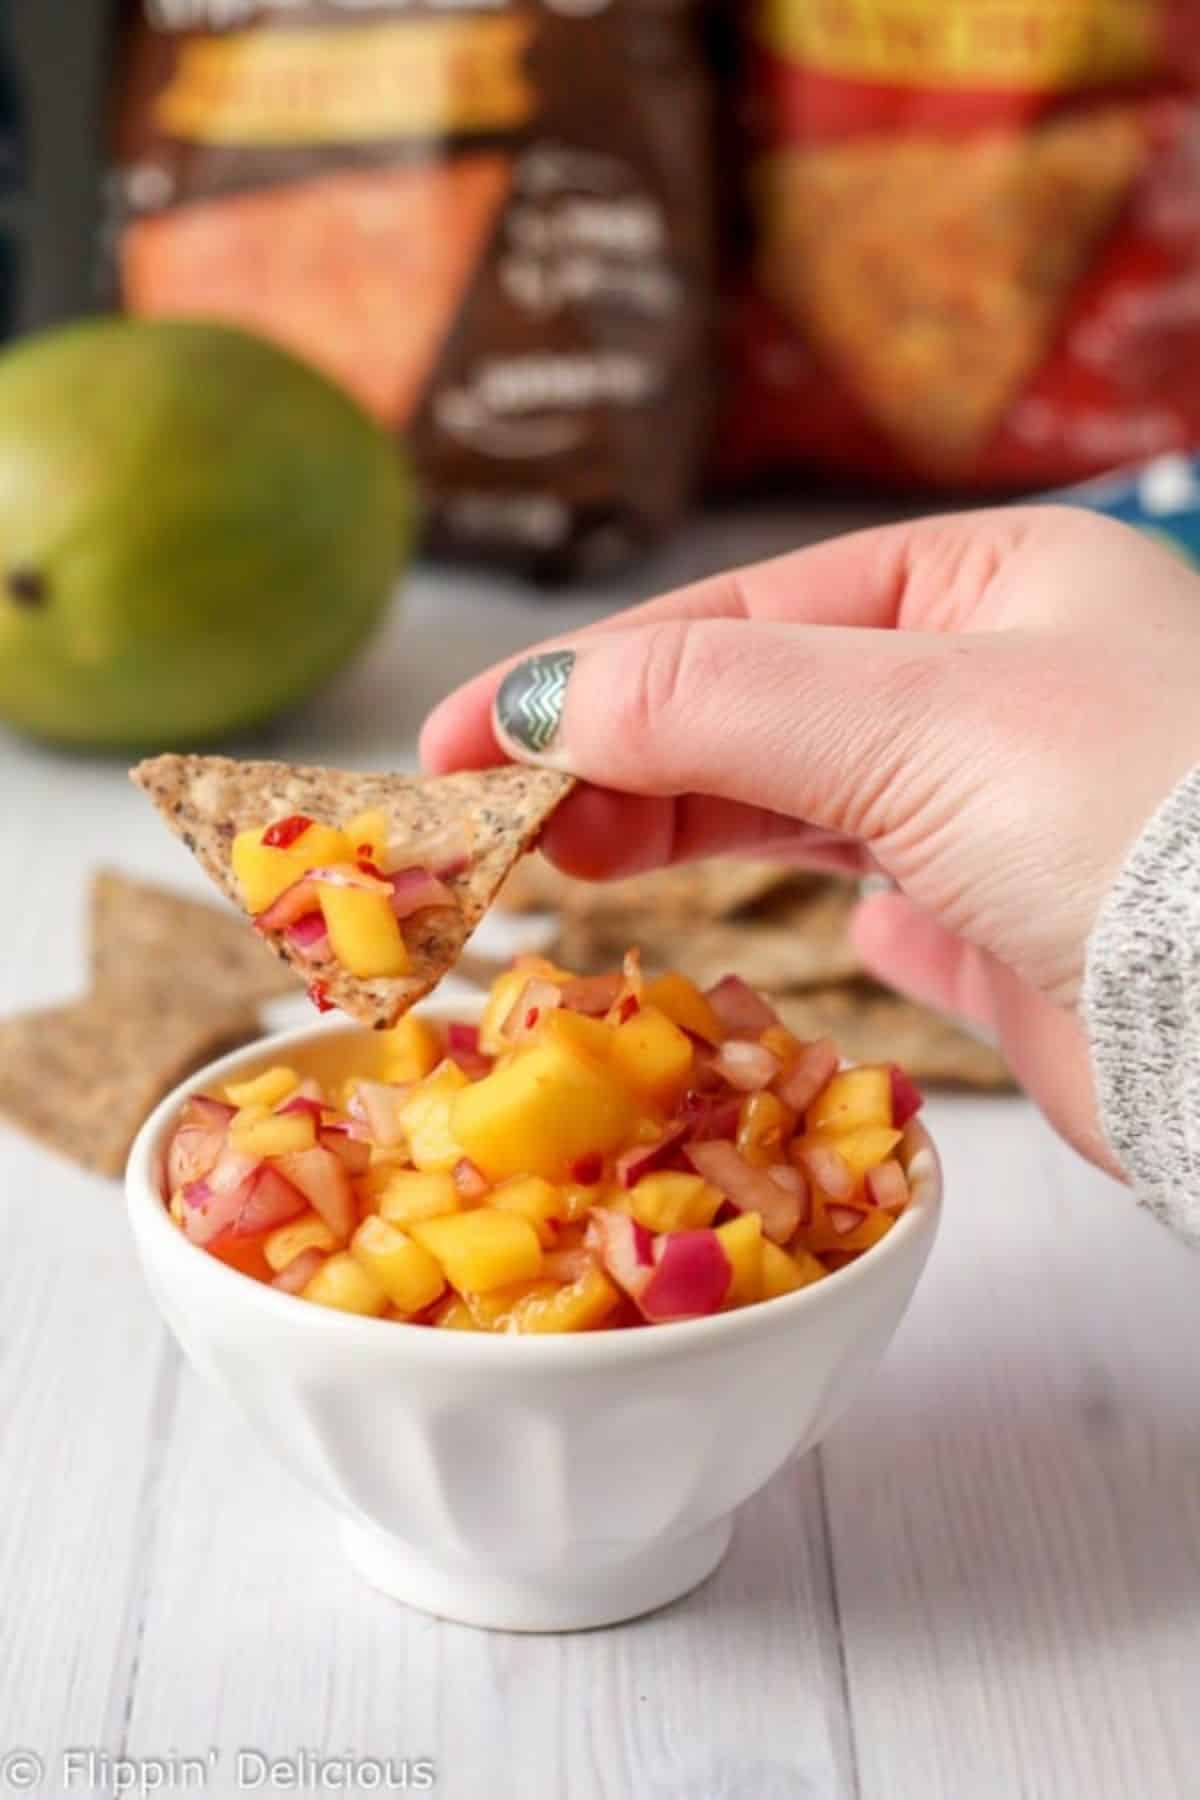 A cracker dipped in Chipotle Mango Salsa over a bowl of Chipotle Mango Salsa.